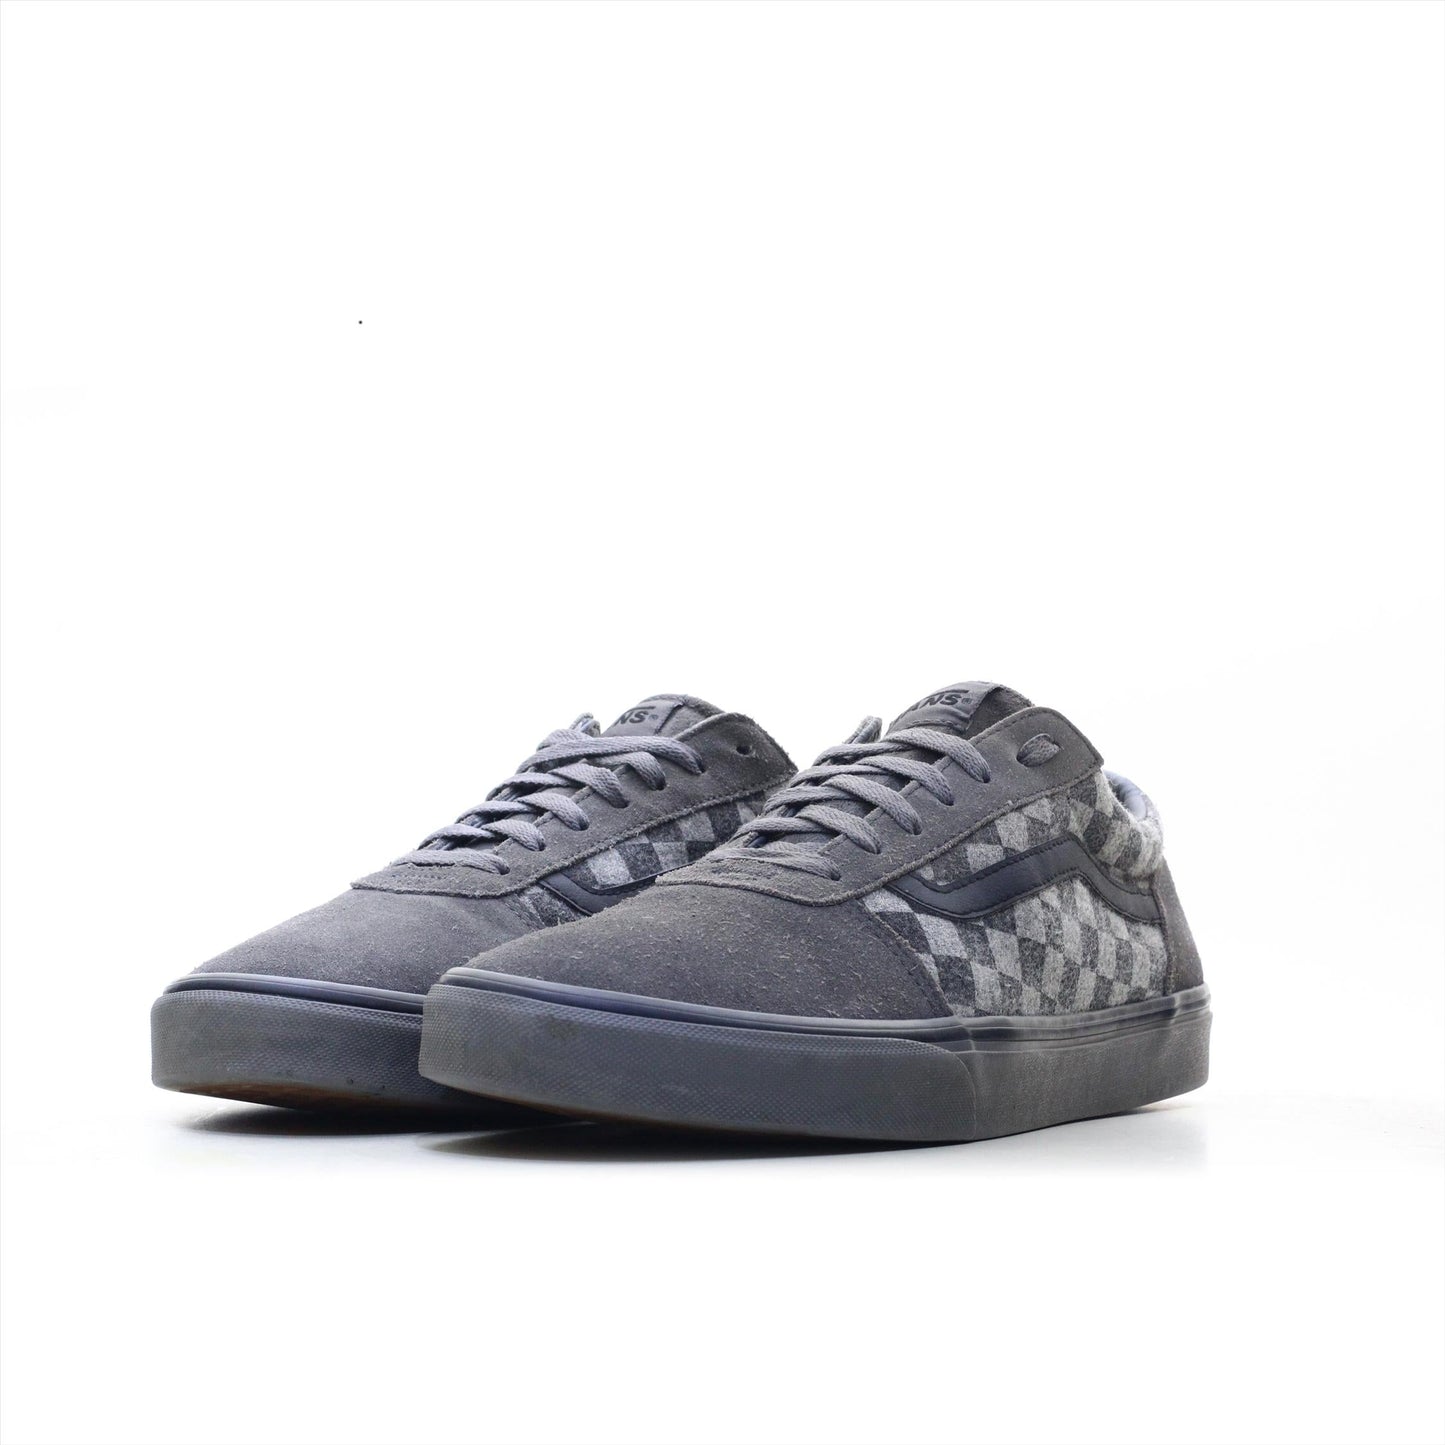 VANS OF THE WALL SUEDE SUPER GRIP (Original USA Imported)